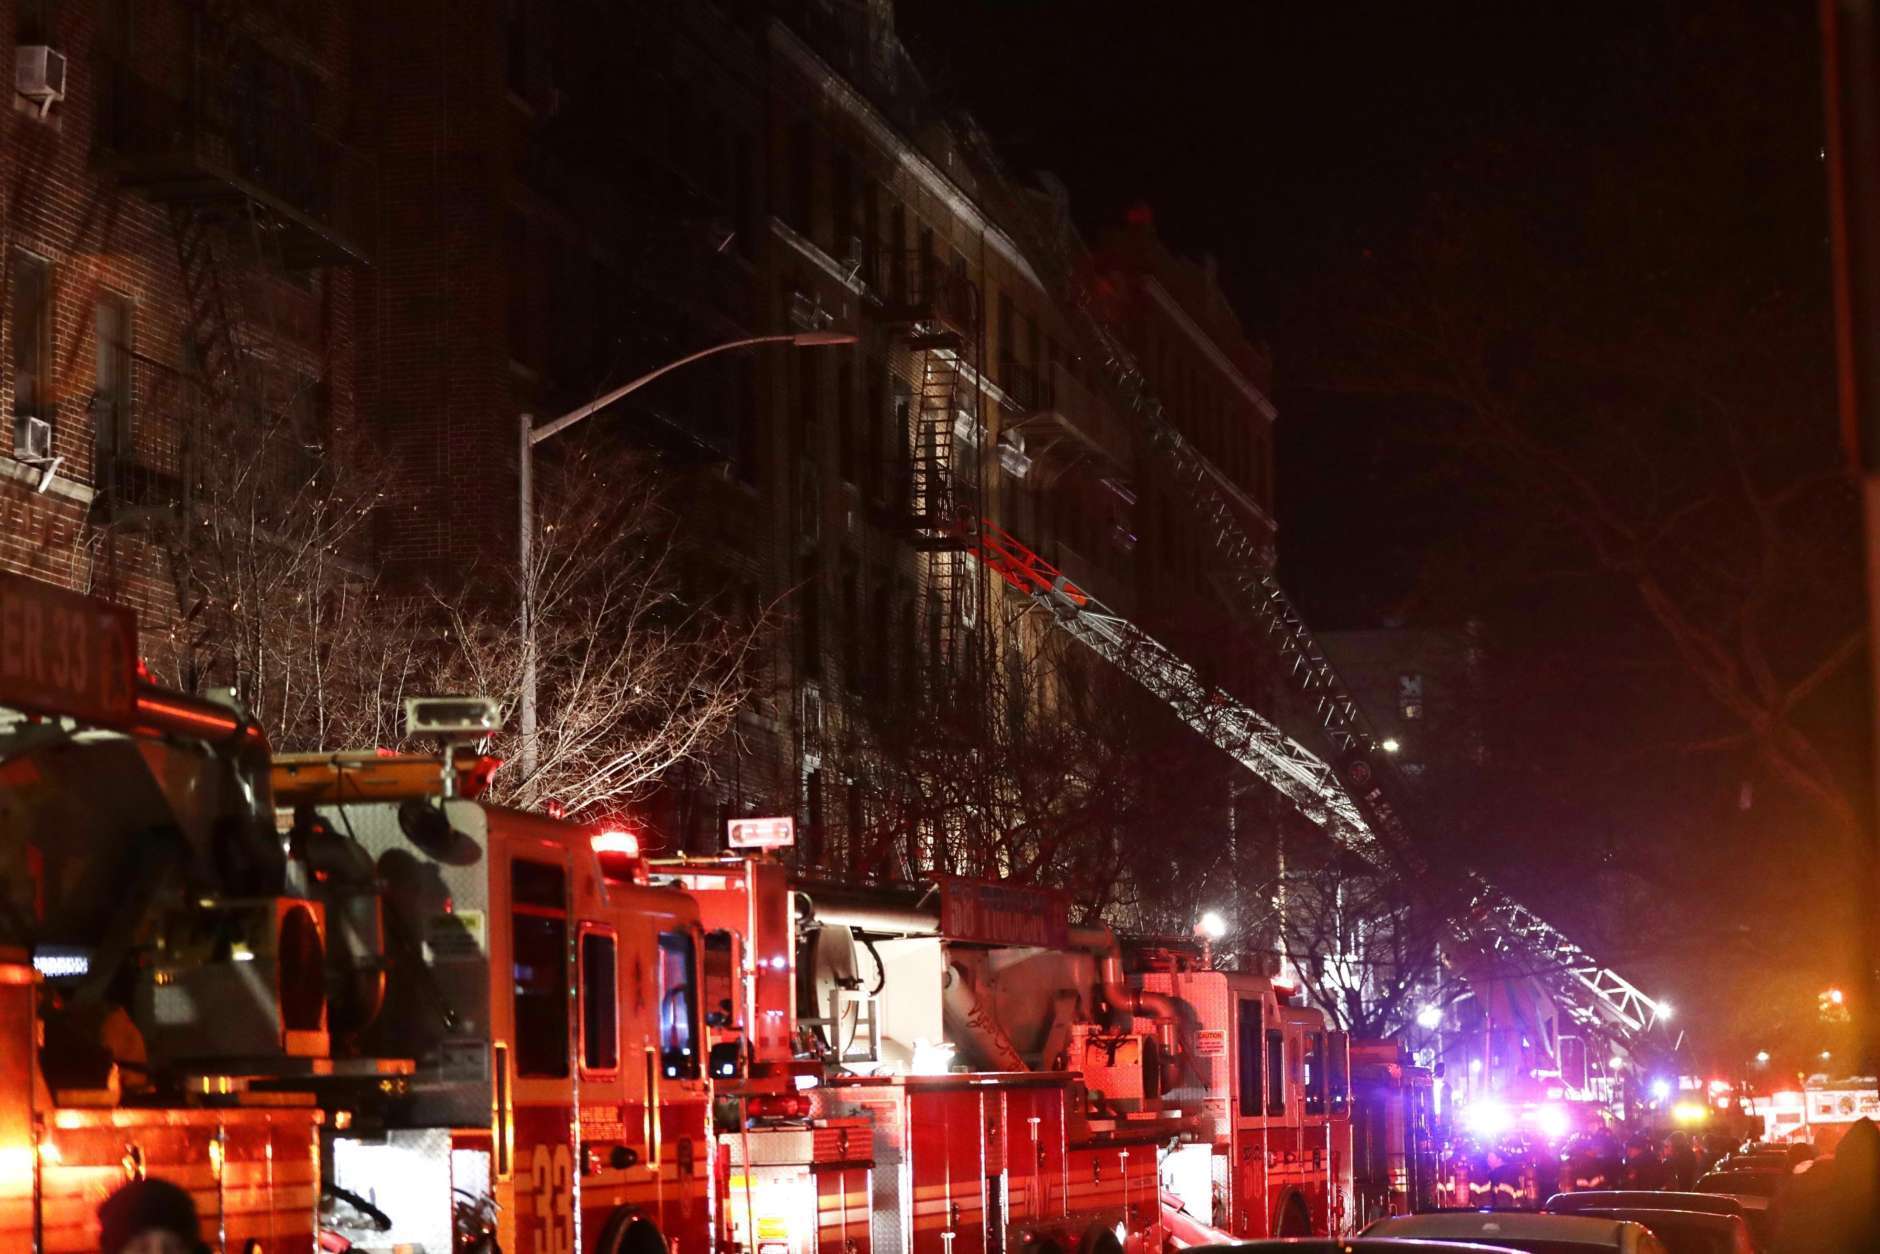 Firefighters respond to a building fire Thursday, Dec. 28, 2017, in the Bronx borough of New York. The Fire Department of New York says a blaze raging in the Bronx apartment building has seriously injured more than a dozen of people. (AP Photo/Frank Franklin II)